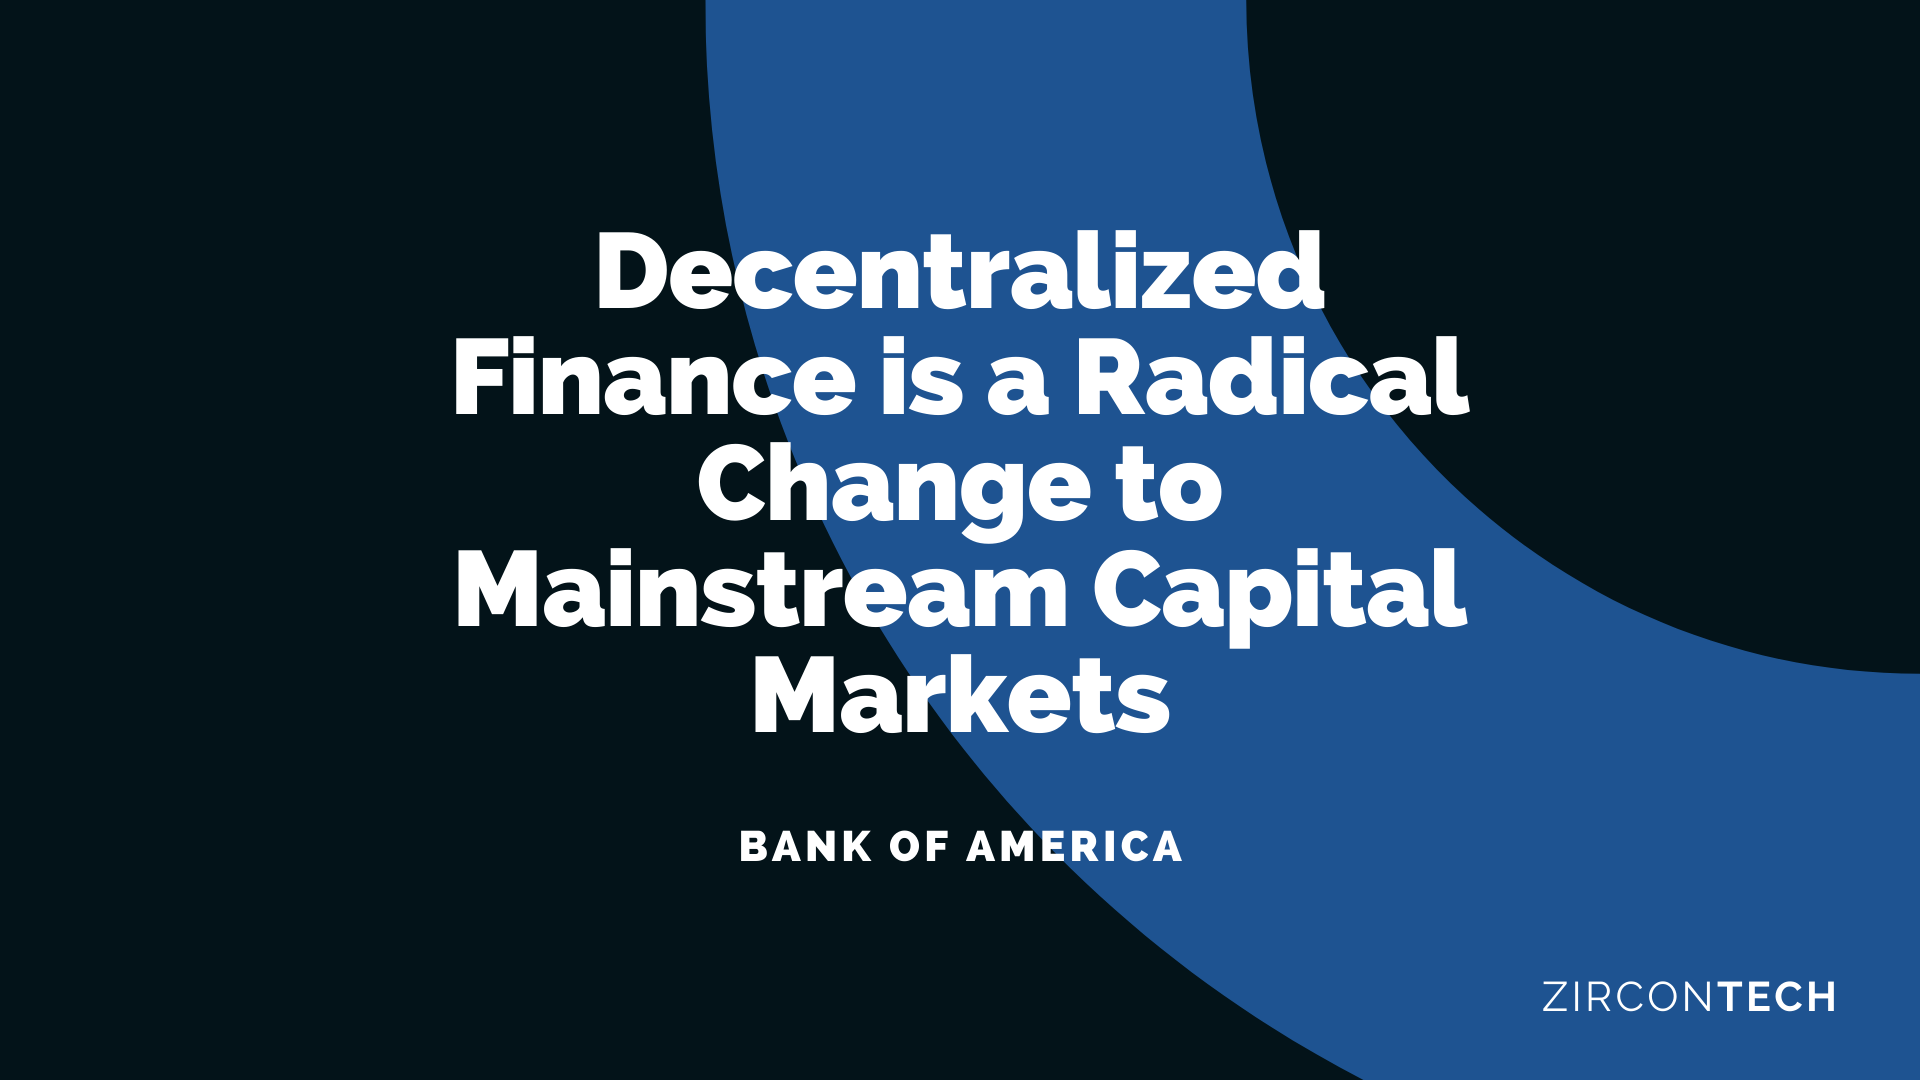 Decentralized Finance as a radical change to Mainstream Capital Markets, related to Blockchain